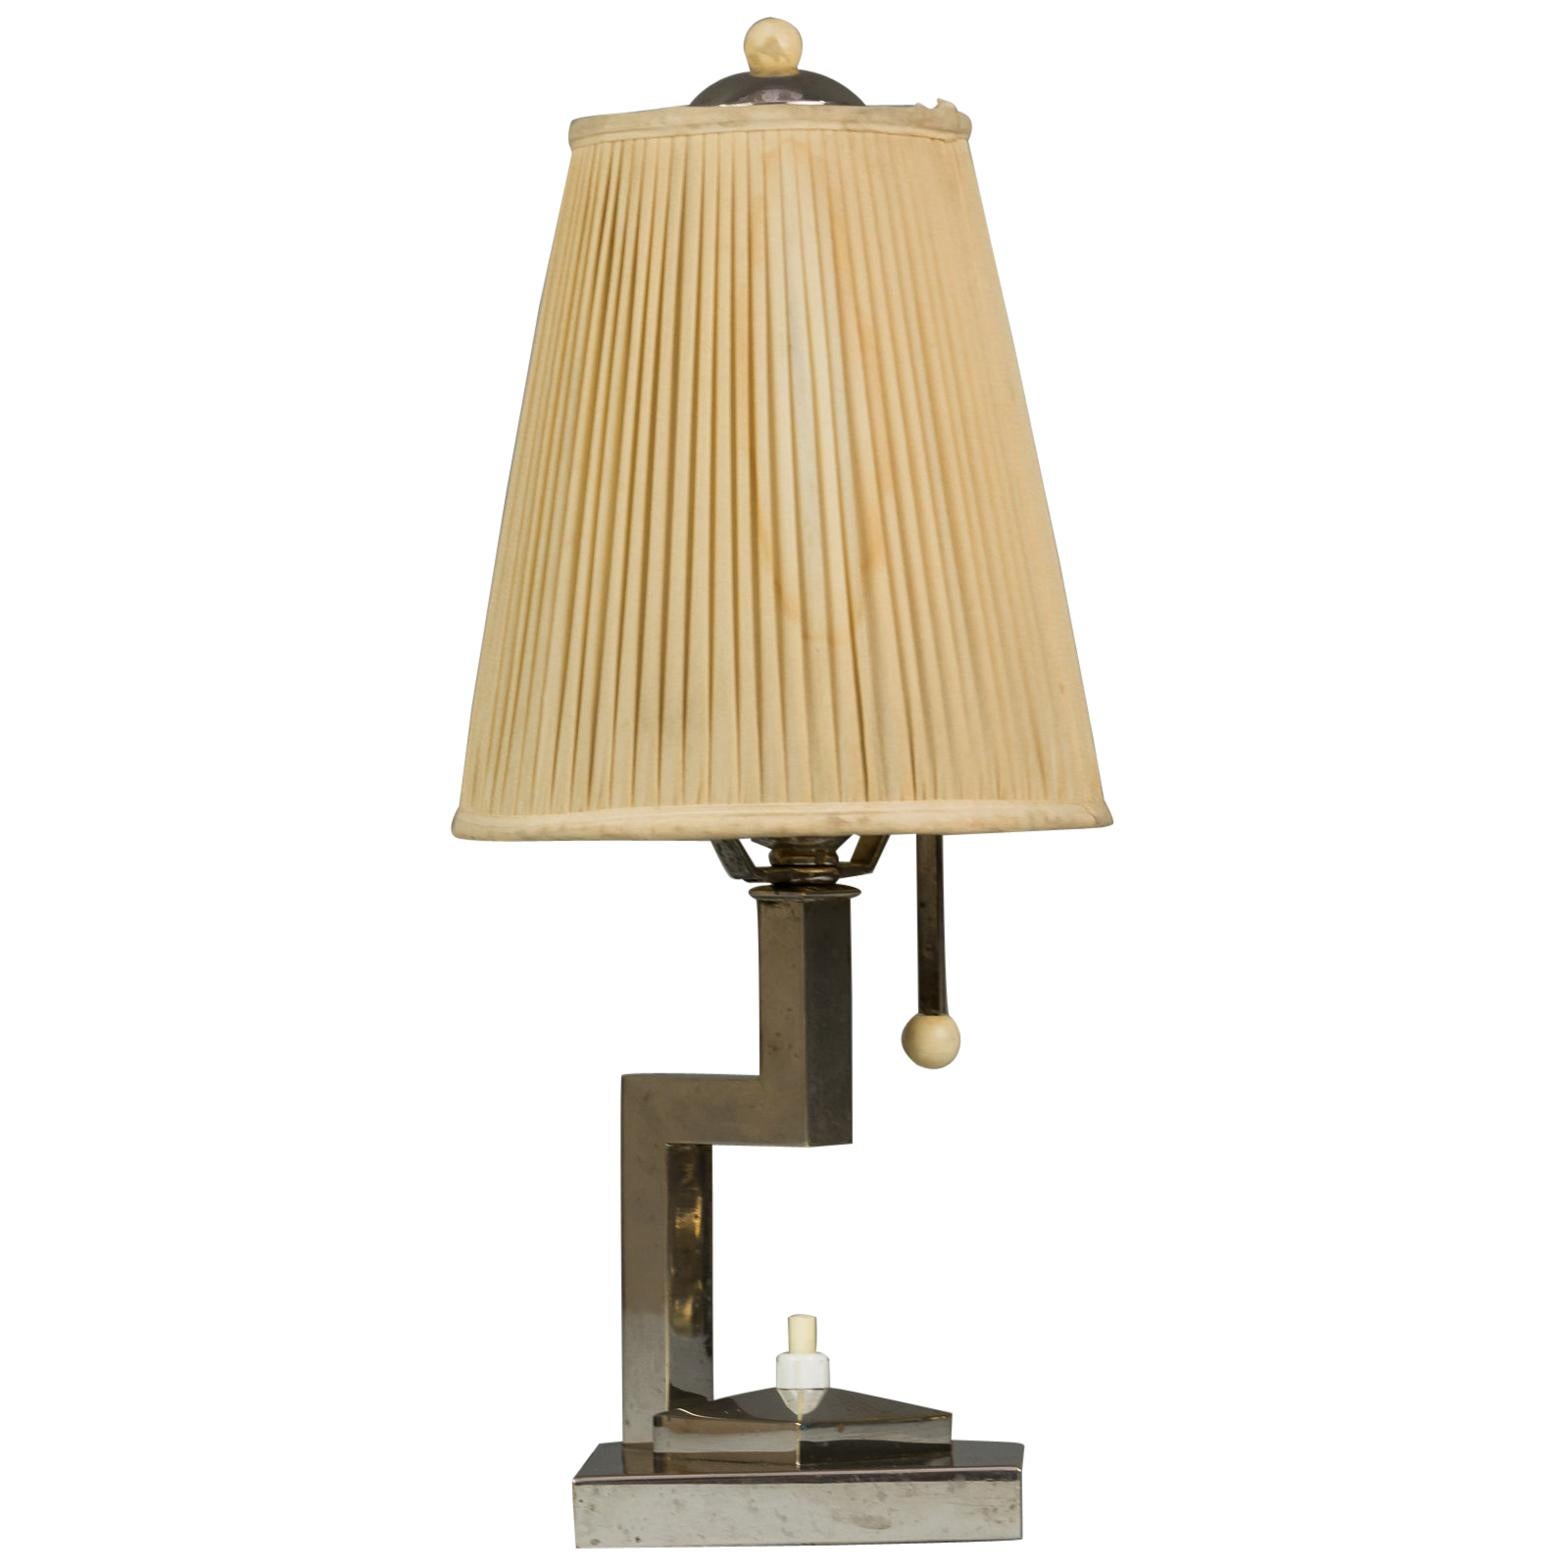 Art Deco Table Lamp Nickel-Plated with Original Shade, circa 1920s